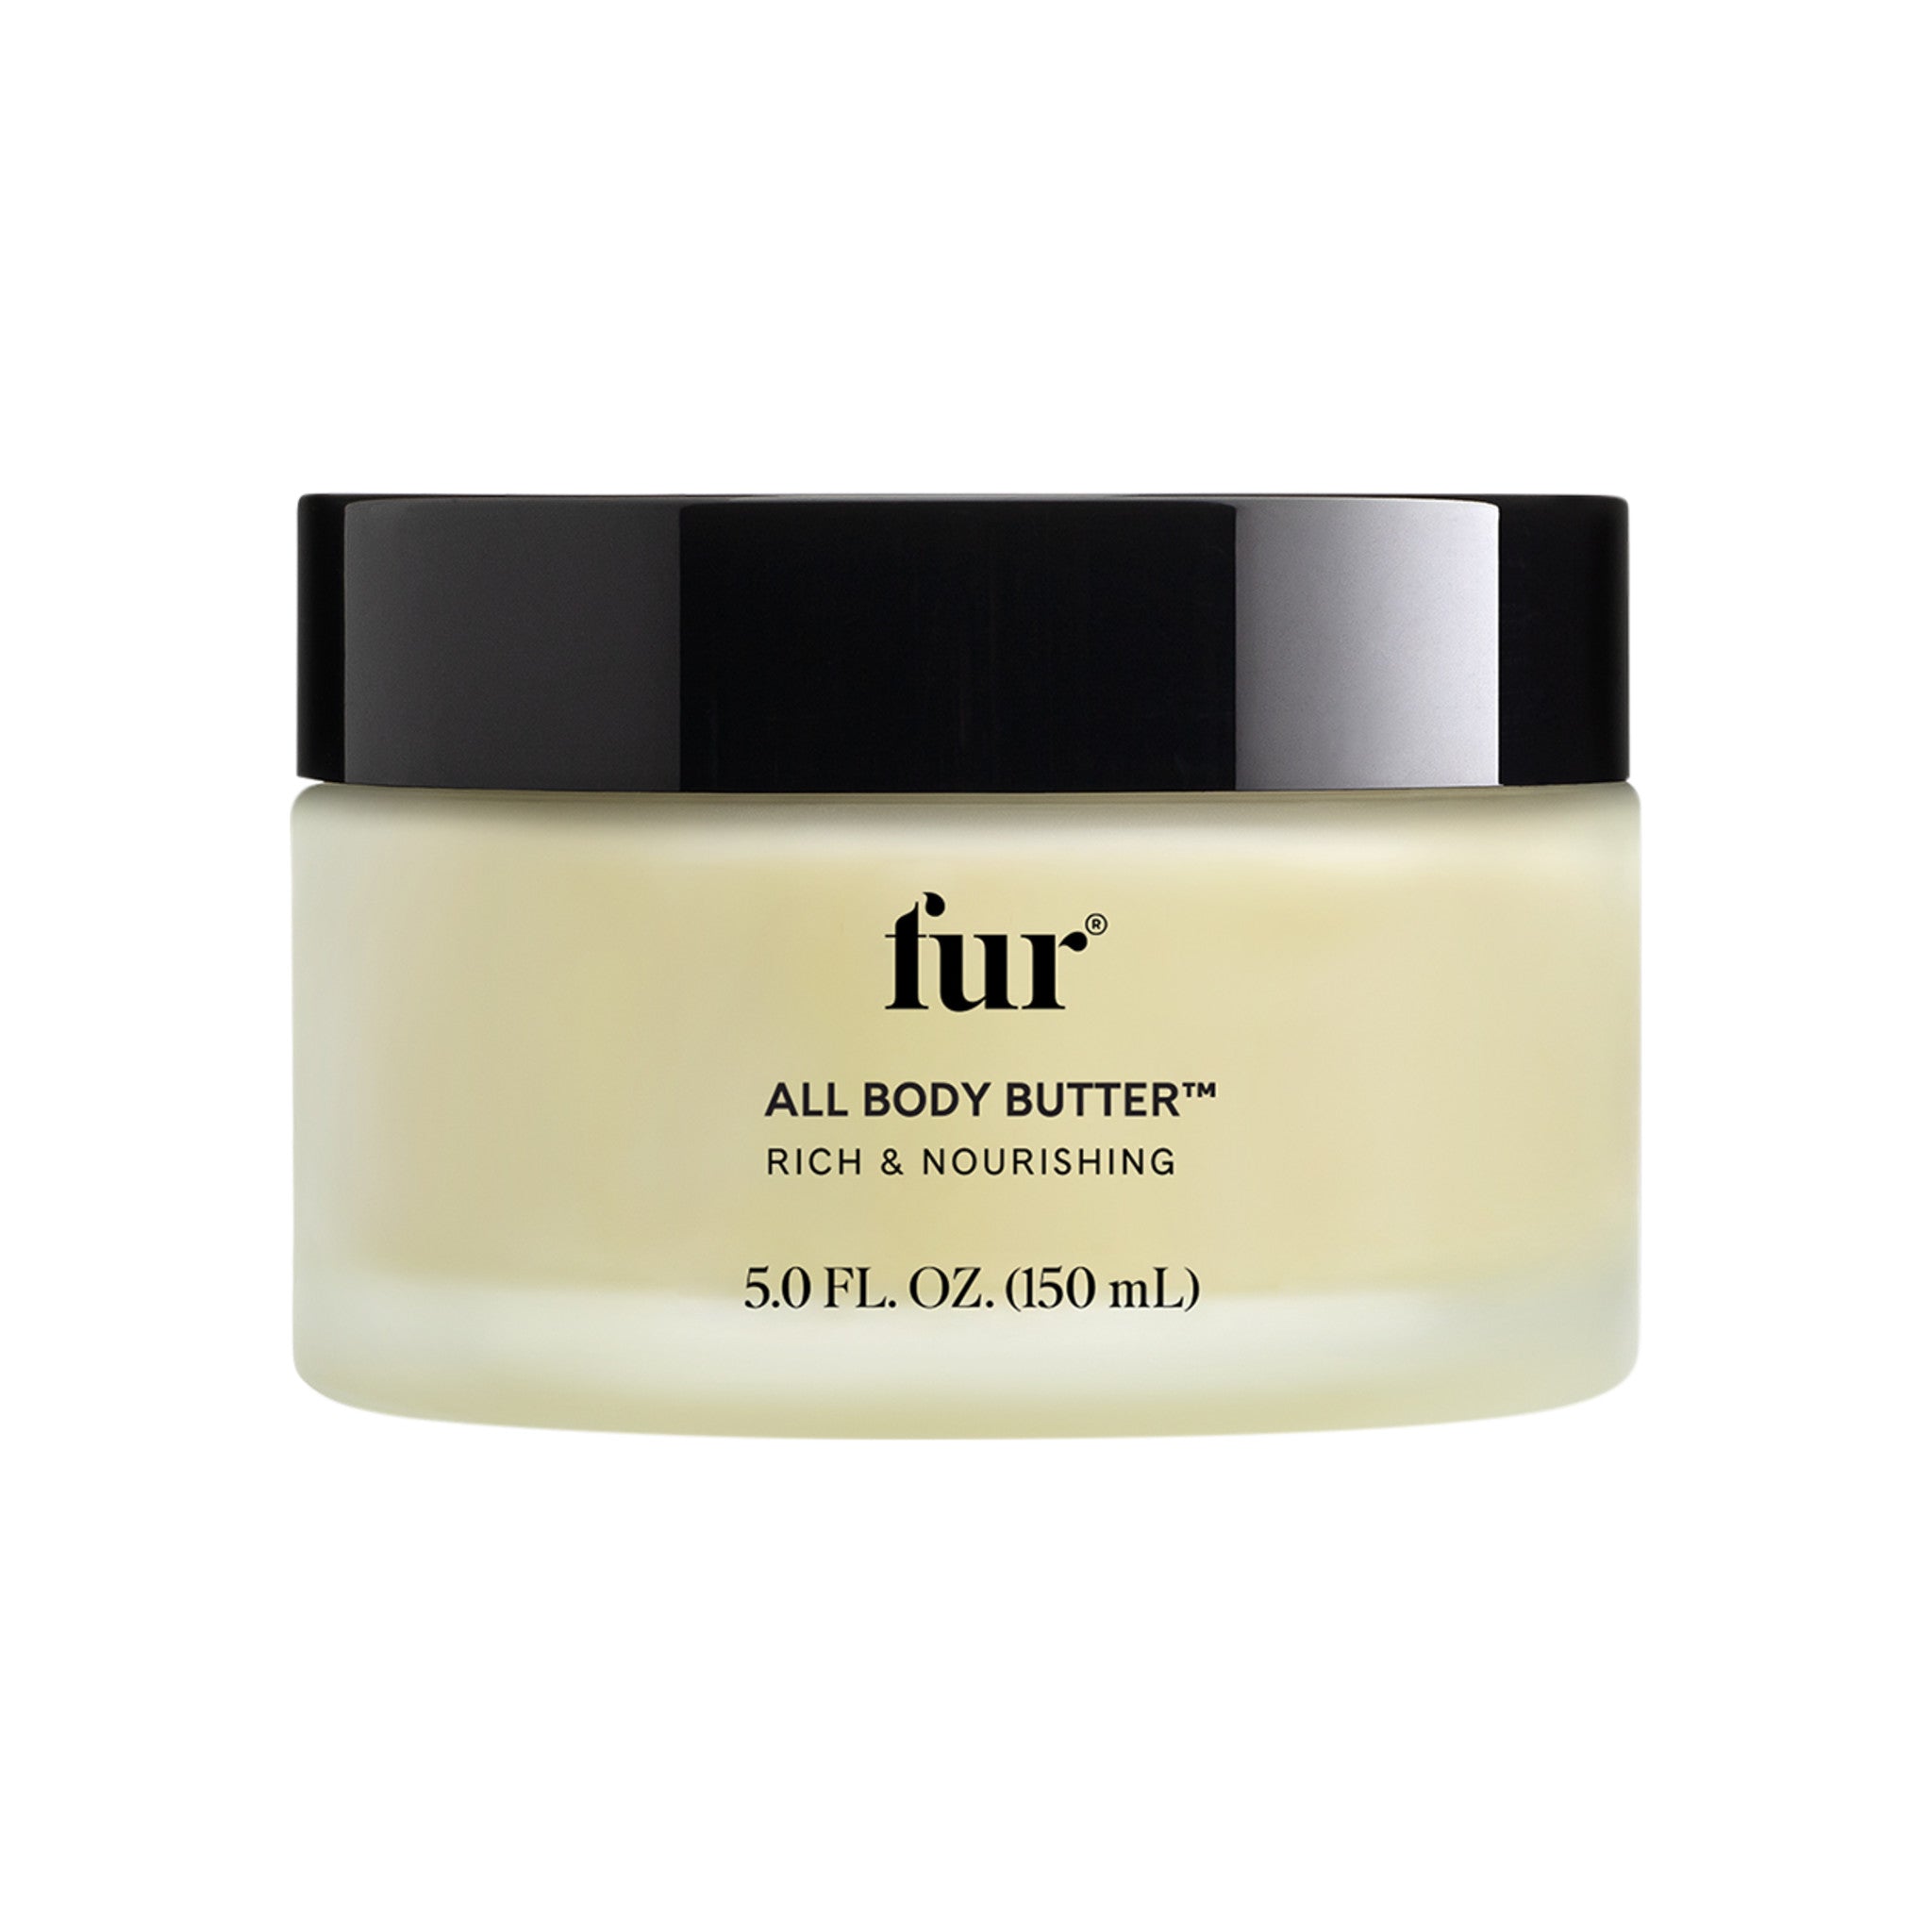 Fur All Body Butter main image.